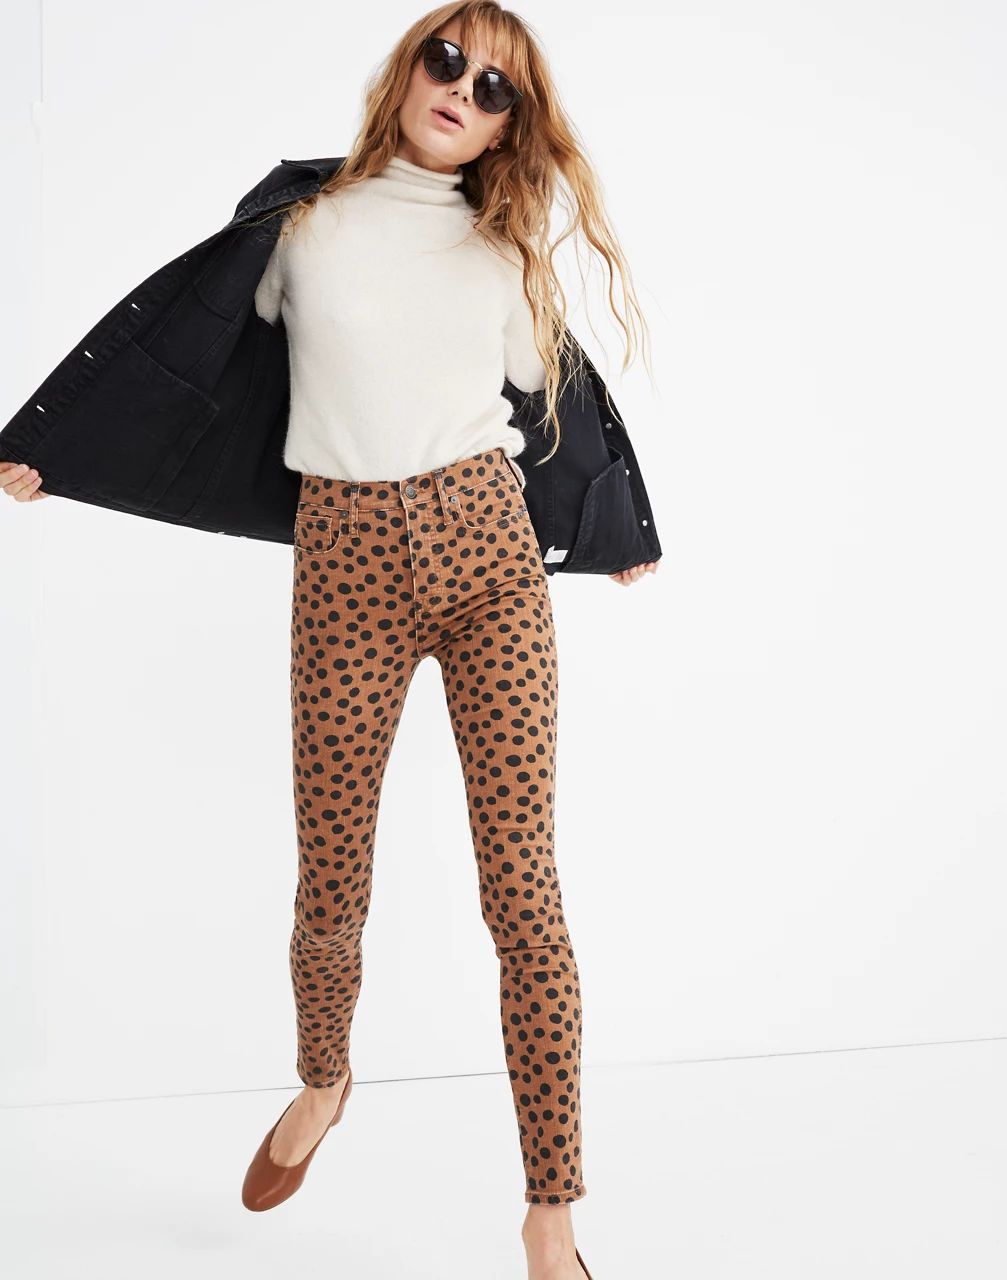 10" High-Rise Skinny Jeans in Leopard Dot | Madewell